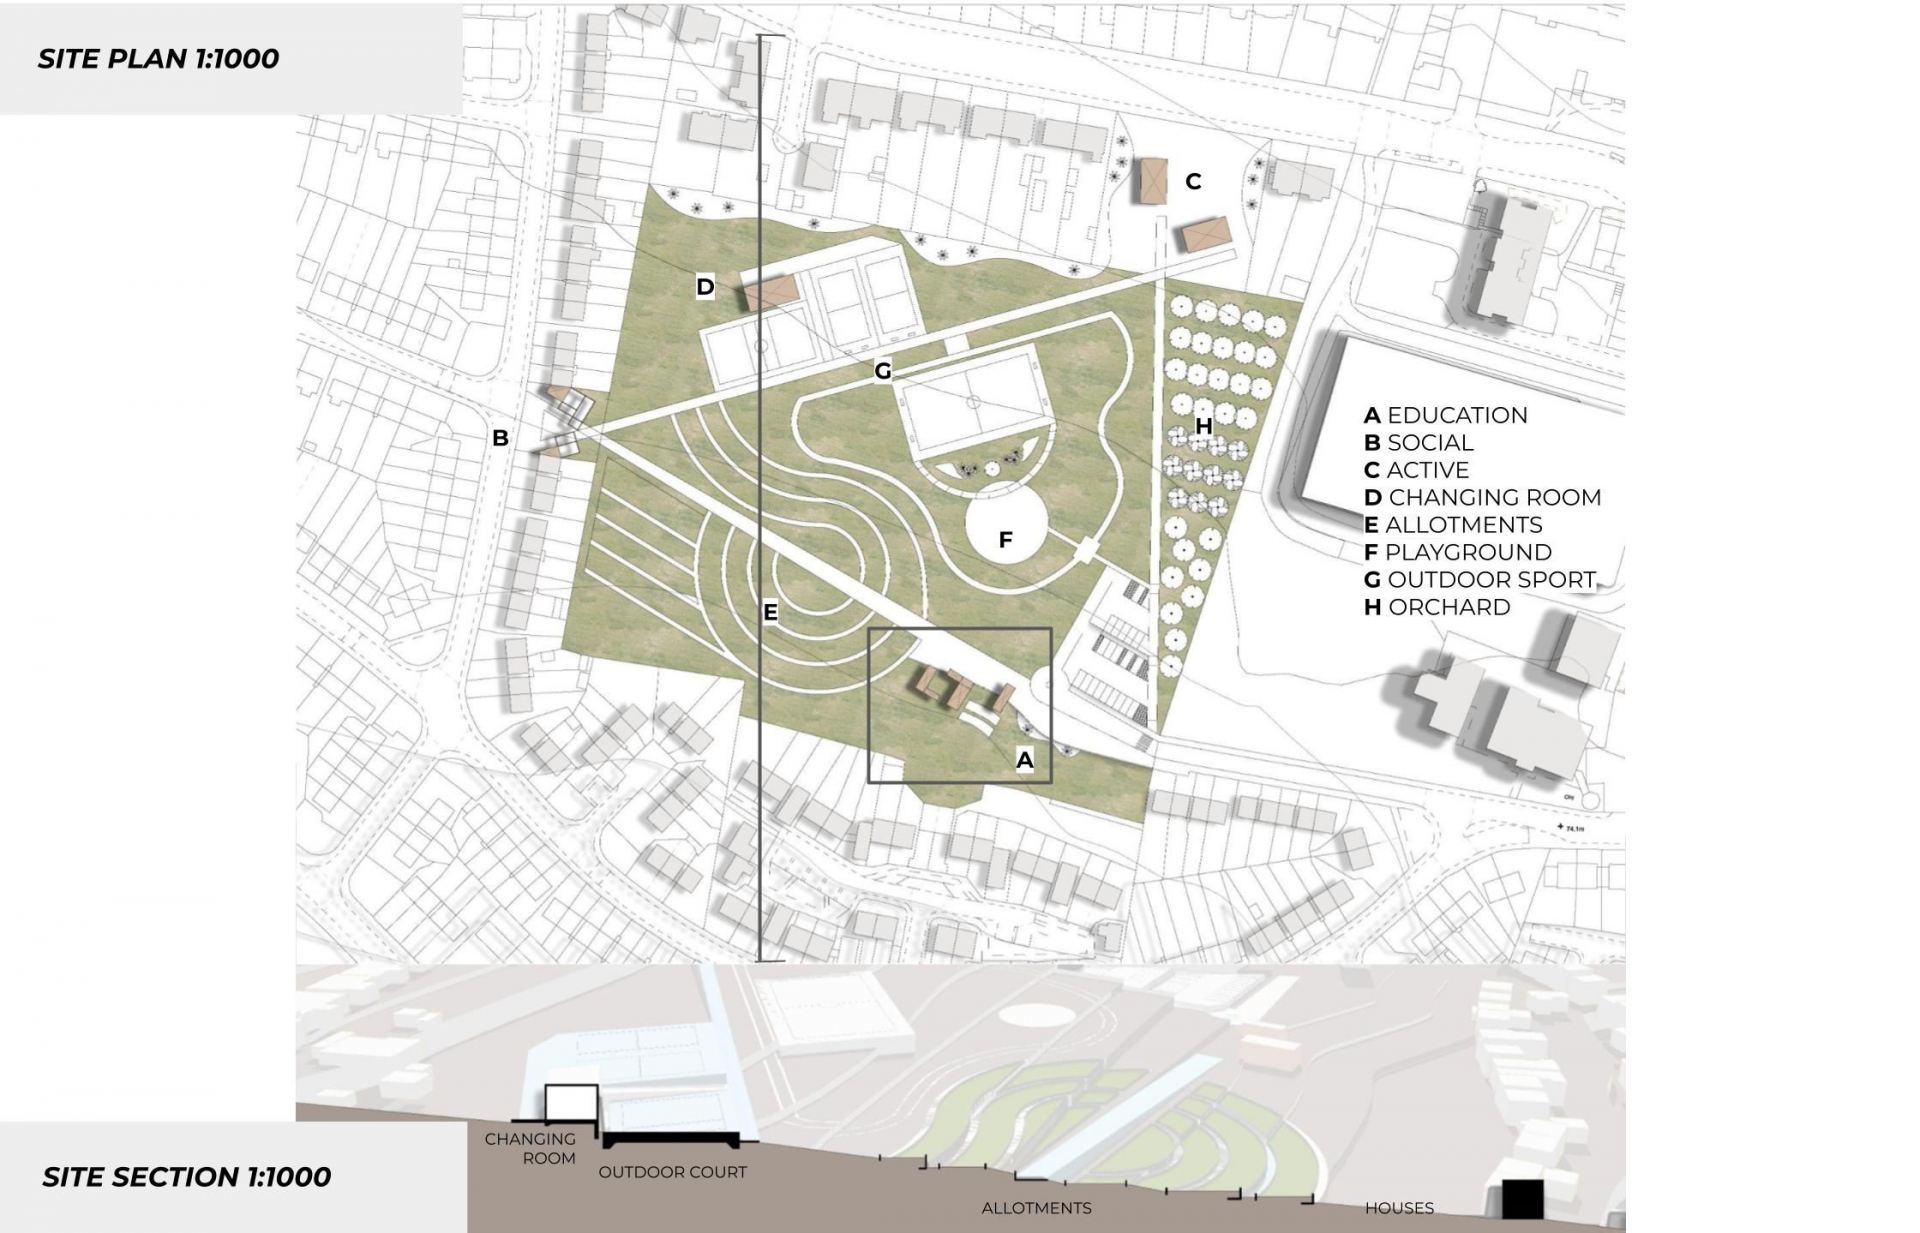 Site plan indicating building proposal area